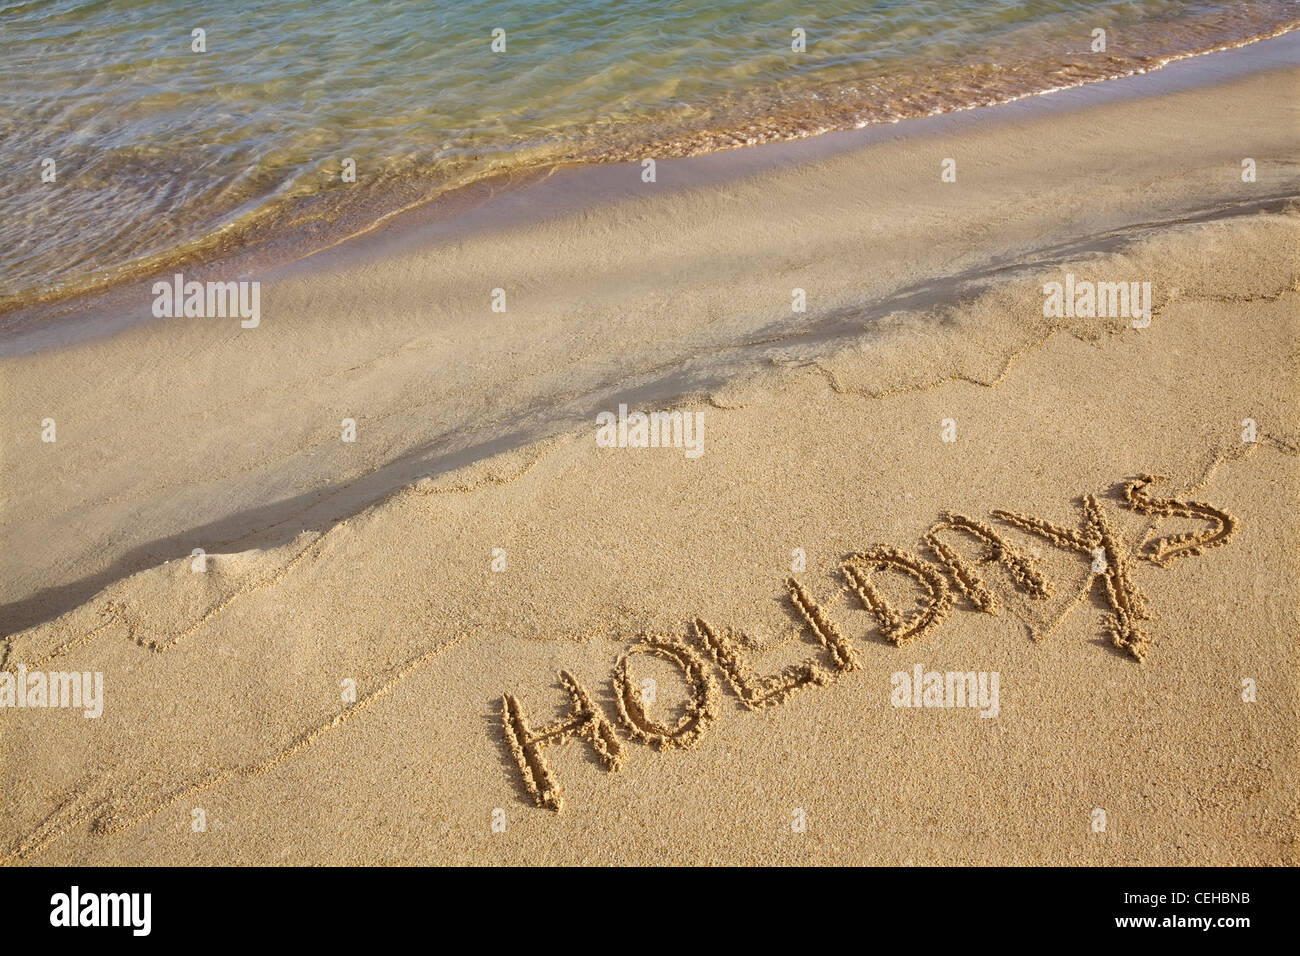 Holidays written in the sand Stock Photo